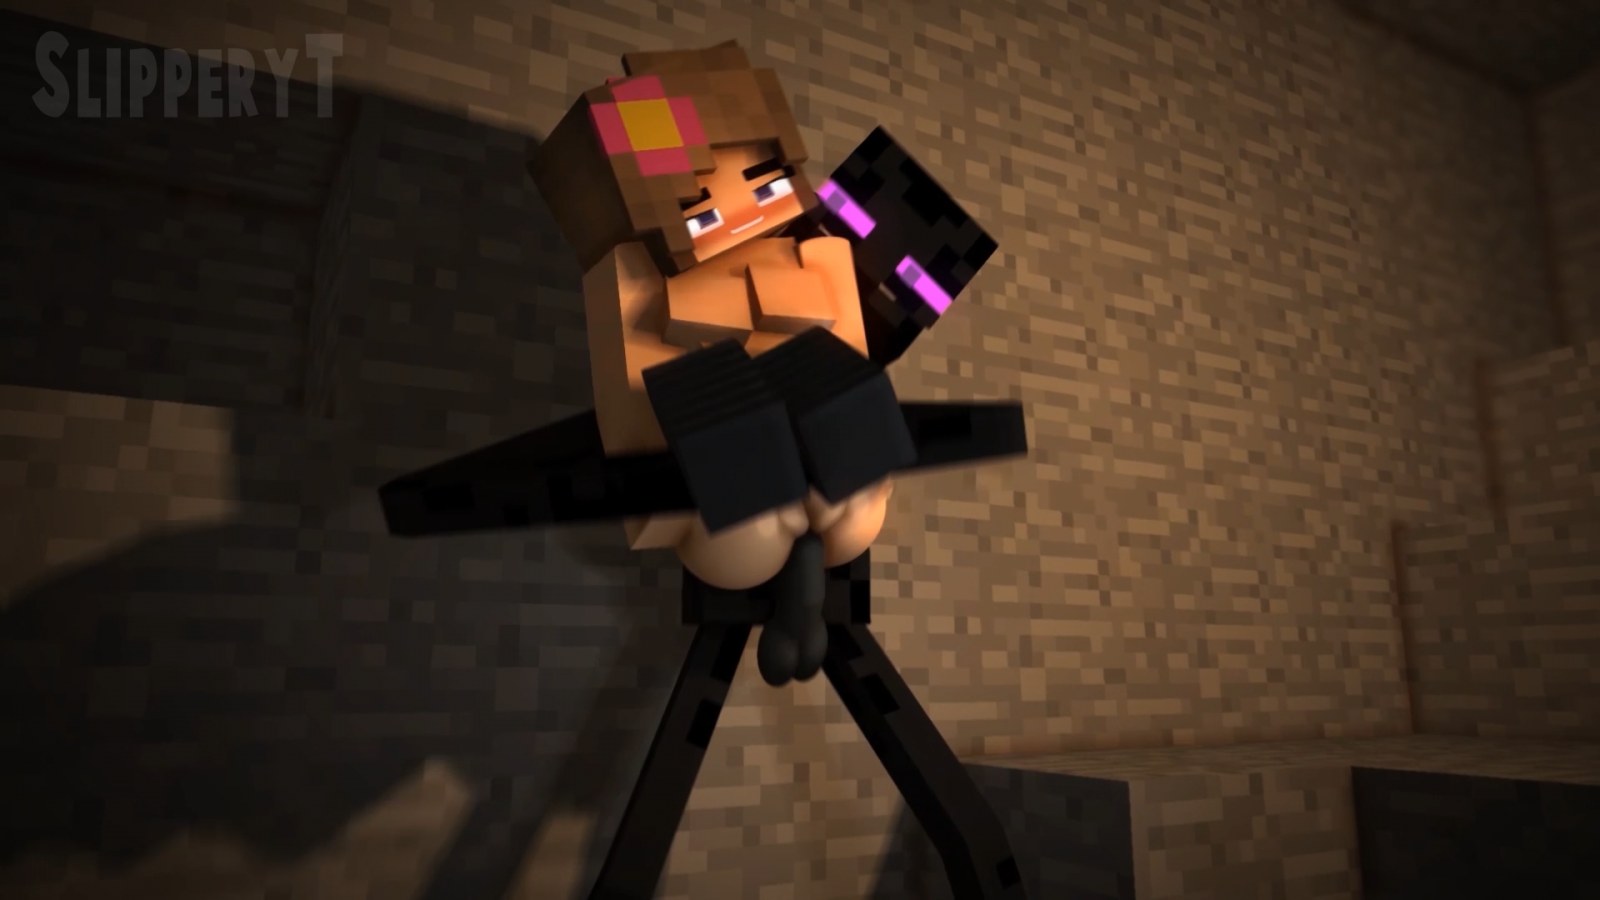 best of Jenny fuck loop stand minecraft